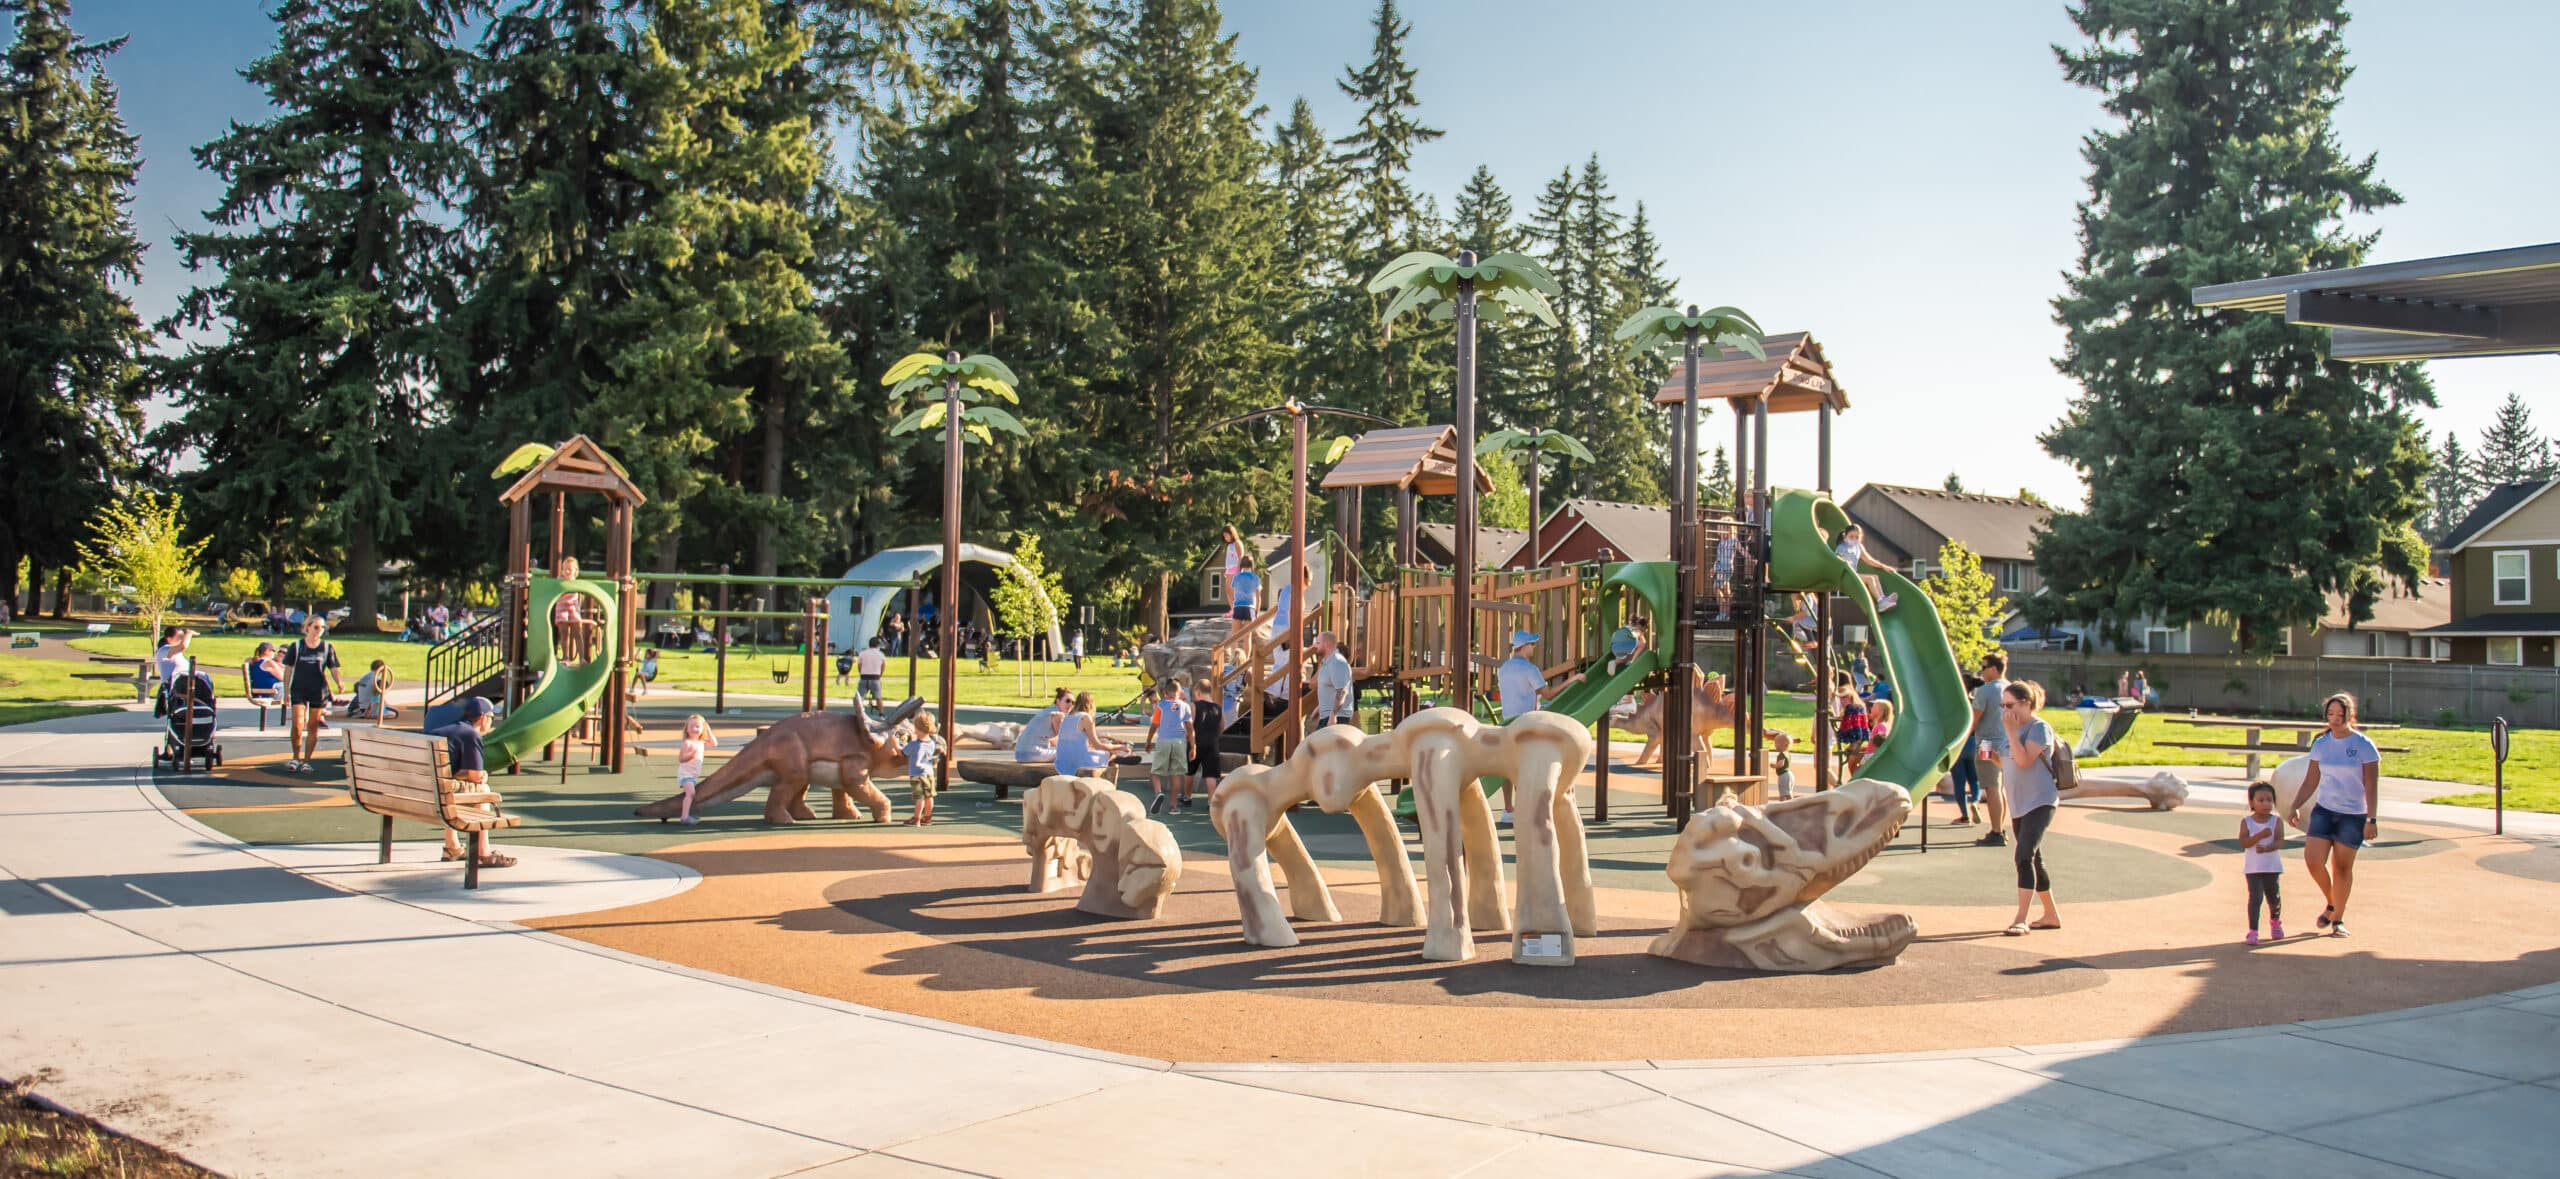 Nikkei Park in Vancouver, a playground featuring dinosaur figures and bones